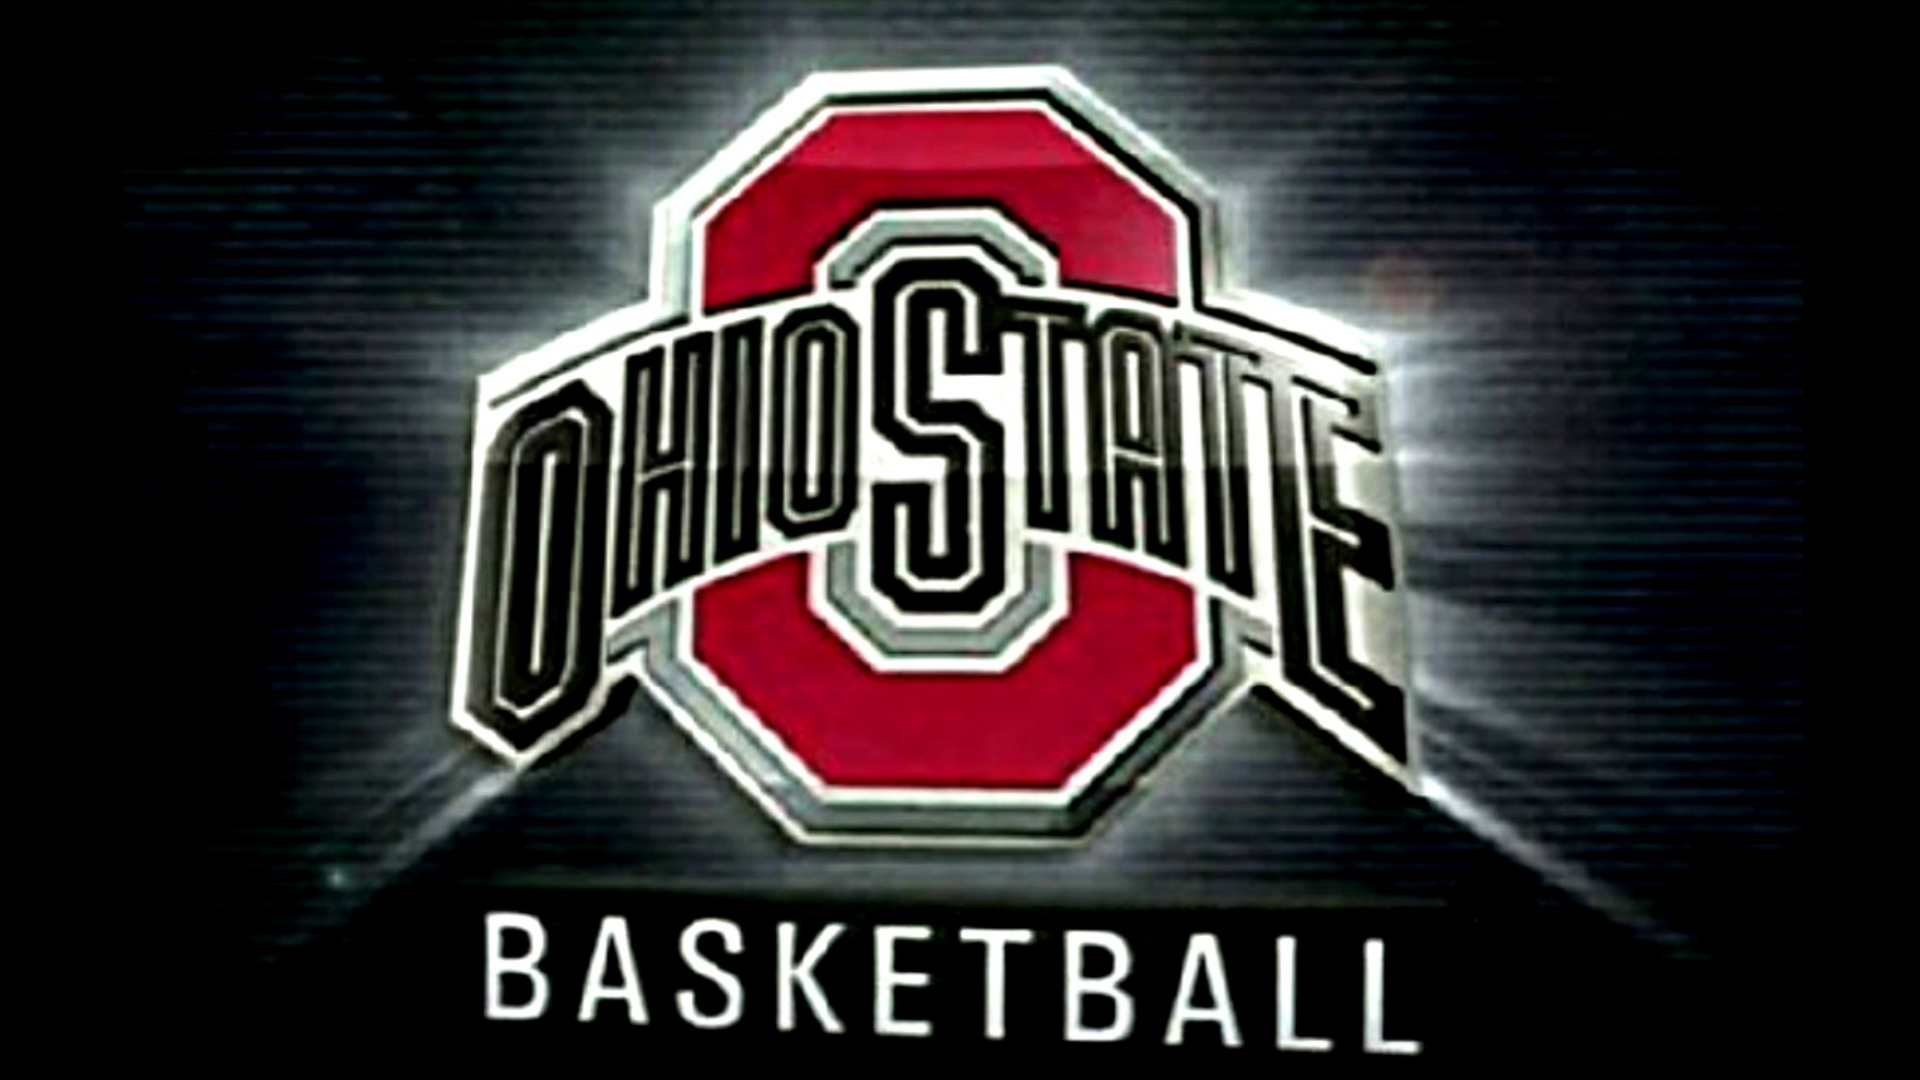 Ohio State University Basketball You Have Entered The Nut House